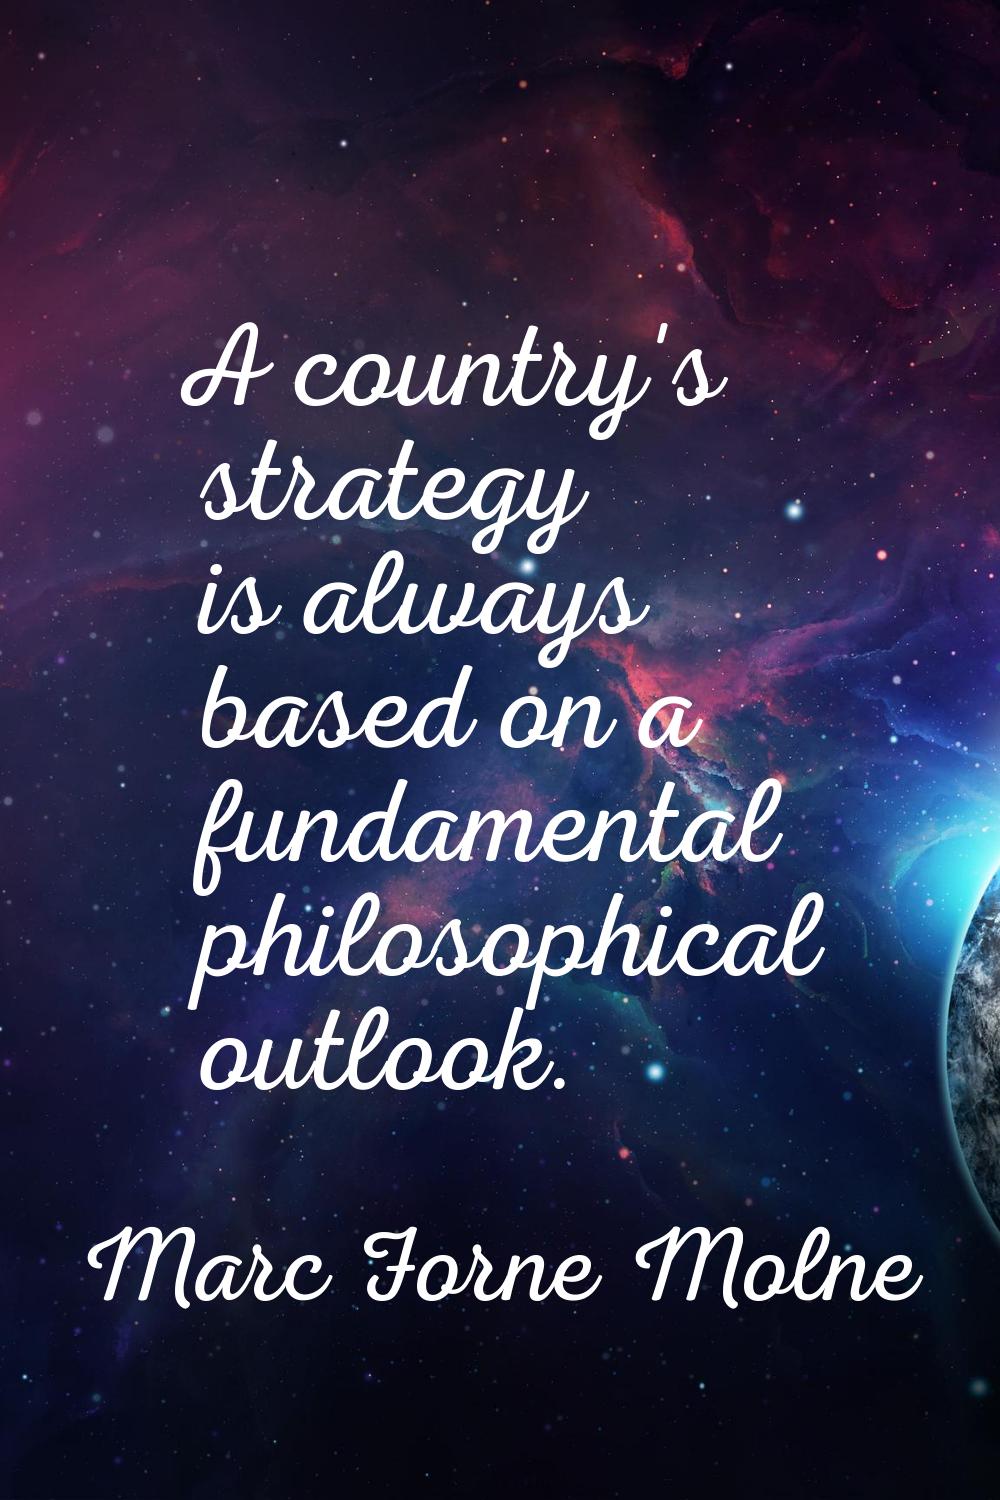 A country's strategy is always based on a fundamental philosophical outlook.